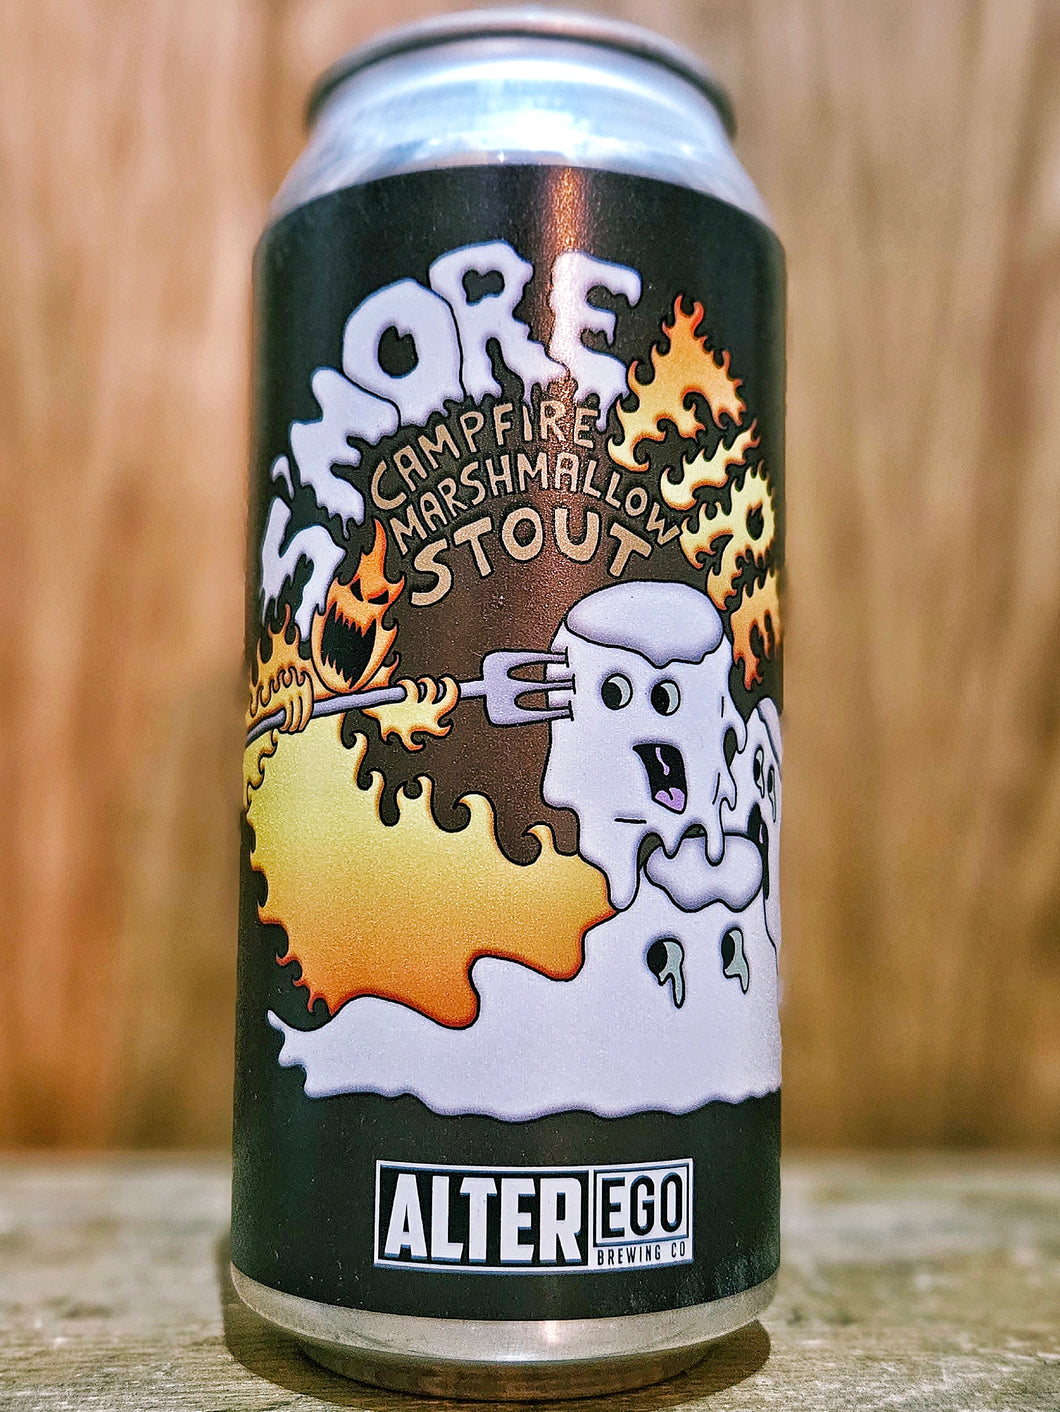 Alter Ego Brewing Co - S'More Fire